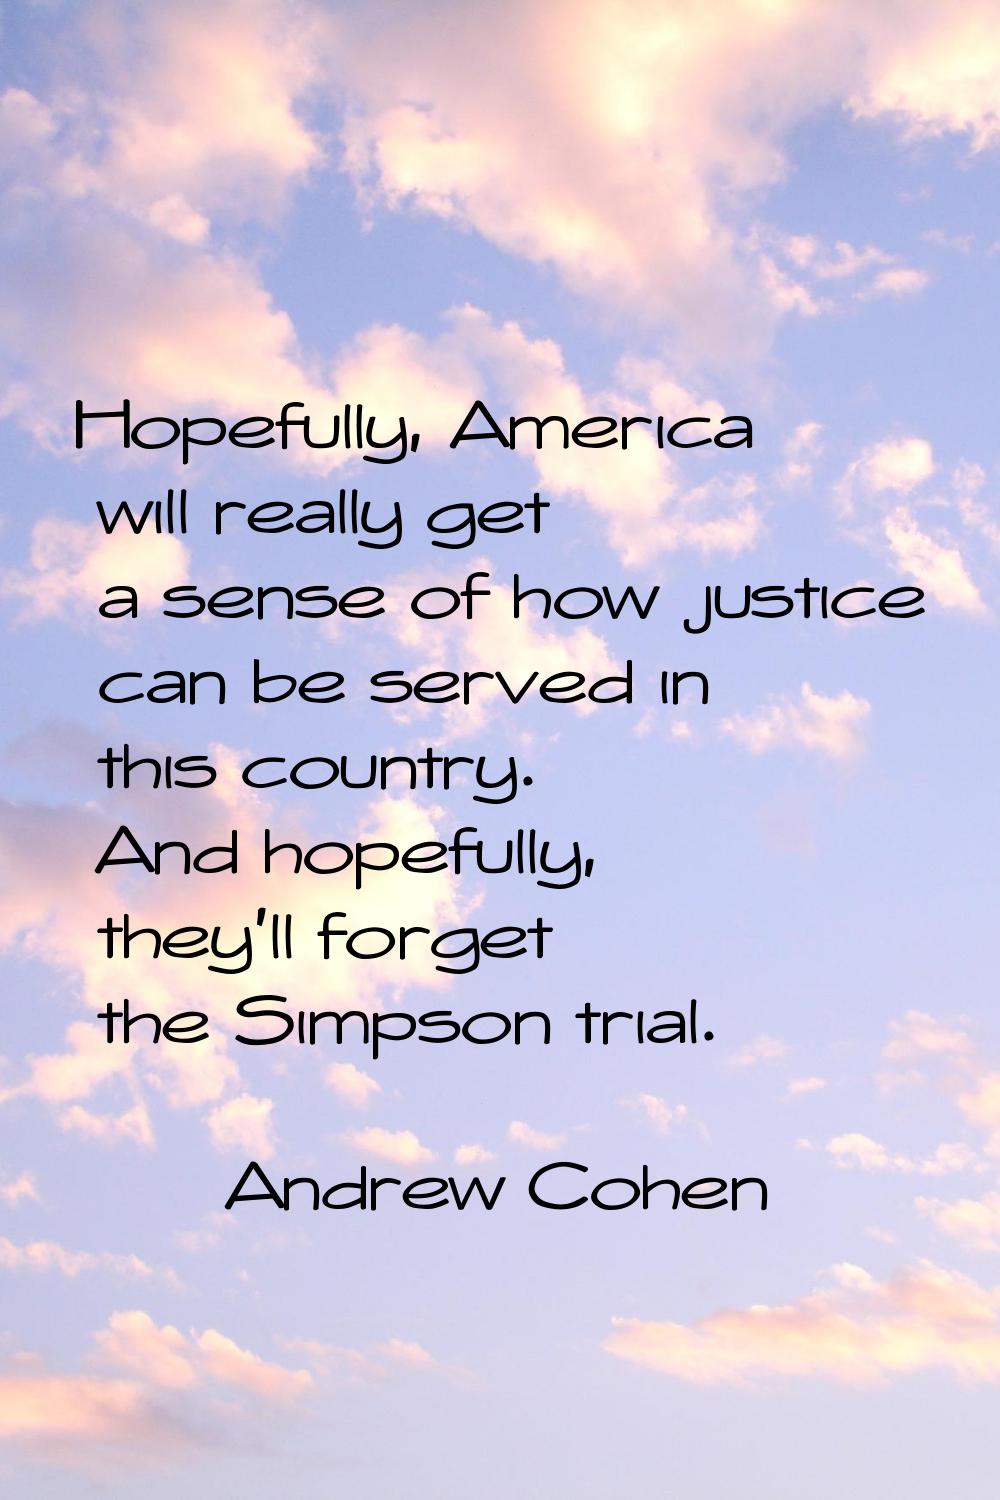 Hopefully, America will really get a sense of how justice can be served in this country. And hopefu